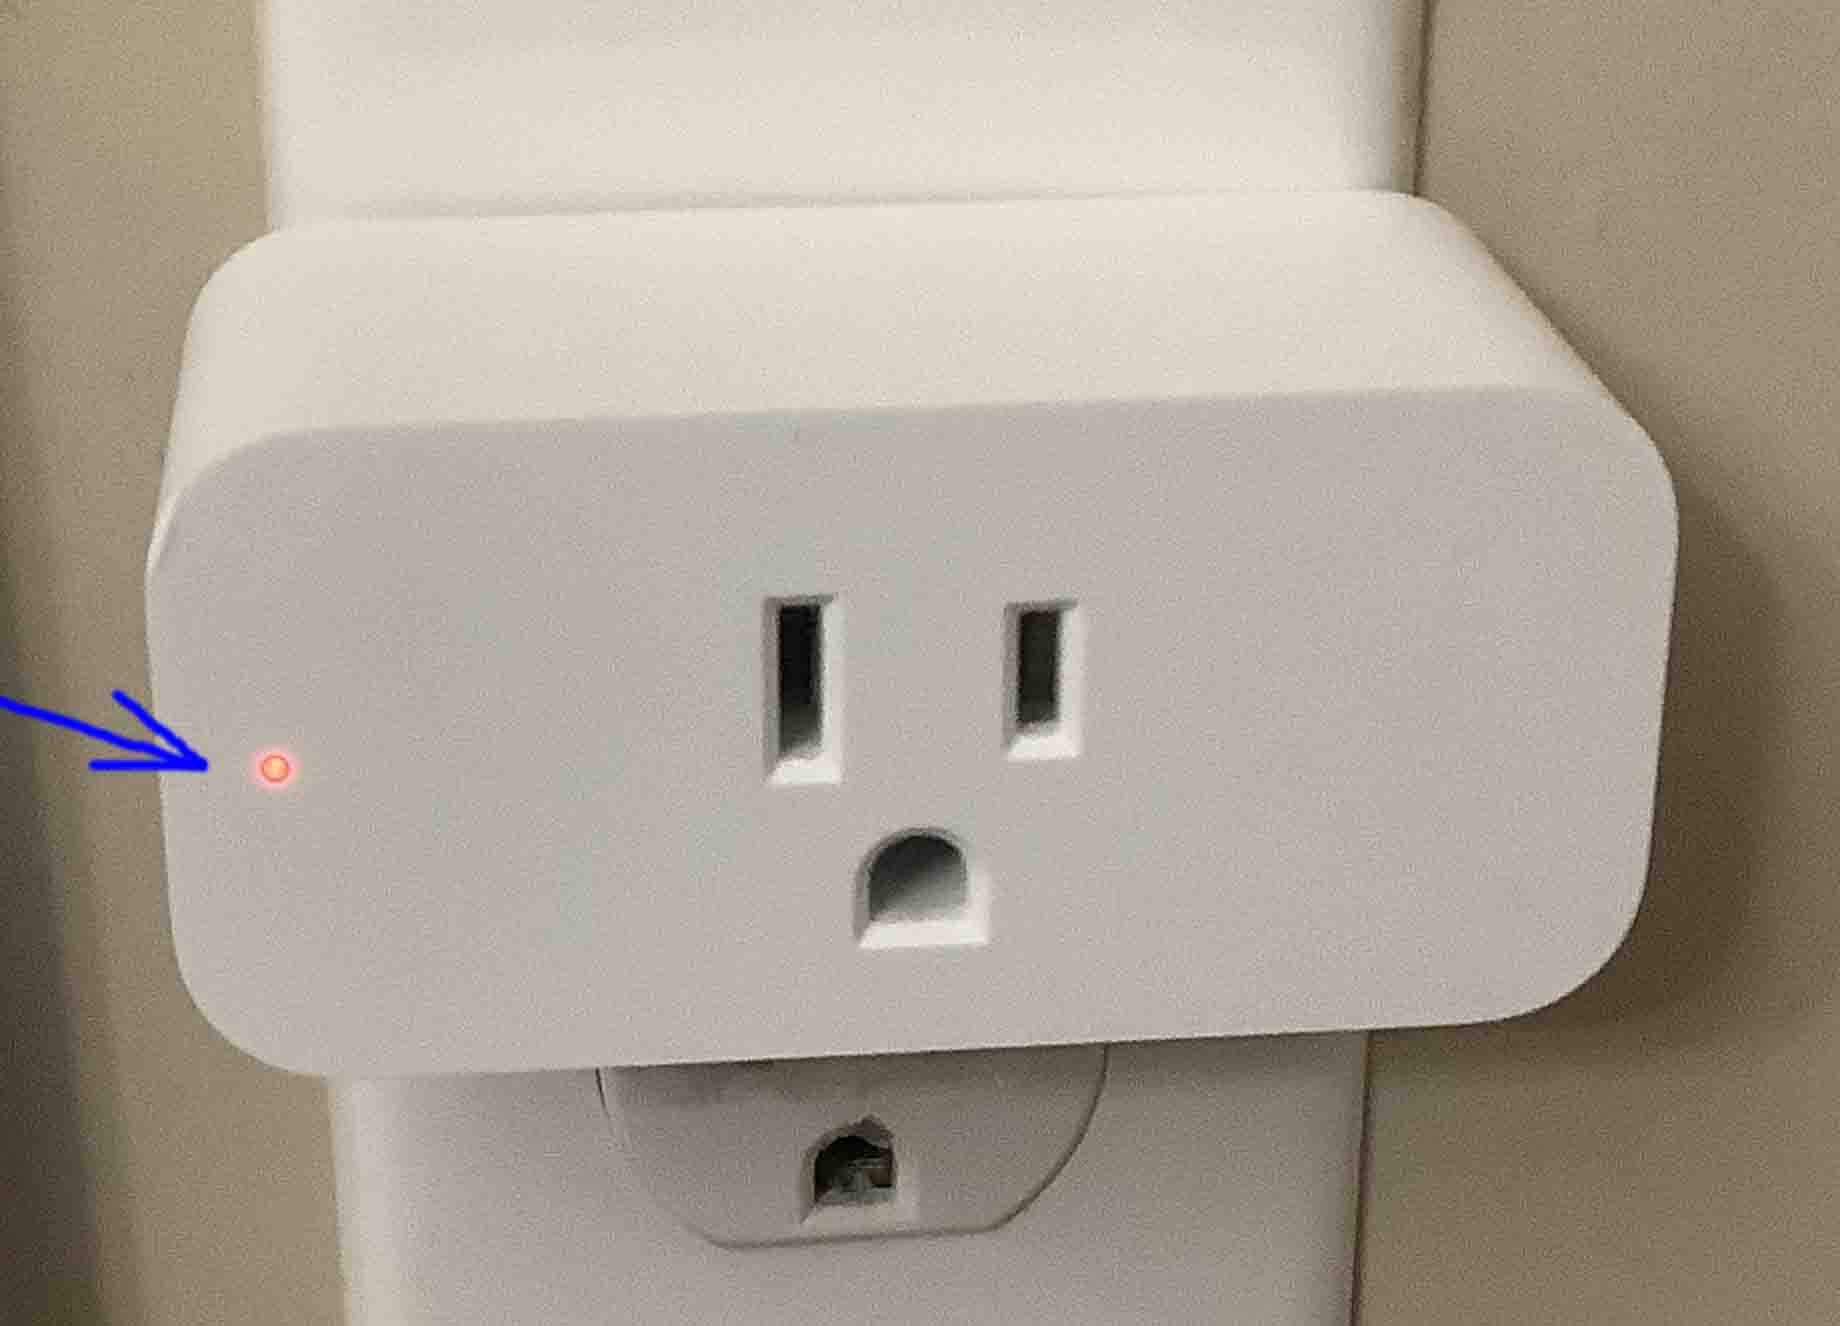 Why Is Smart Plug Blinking Red